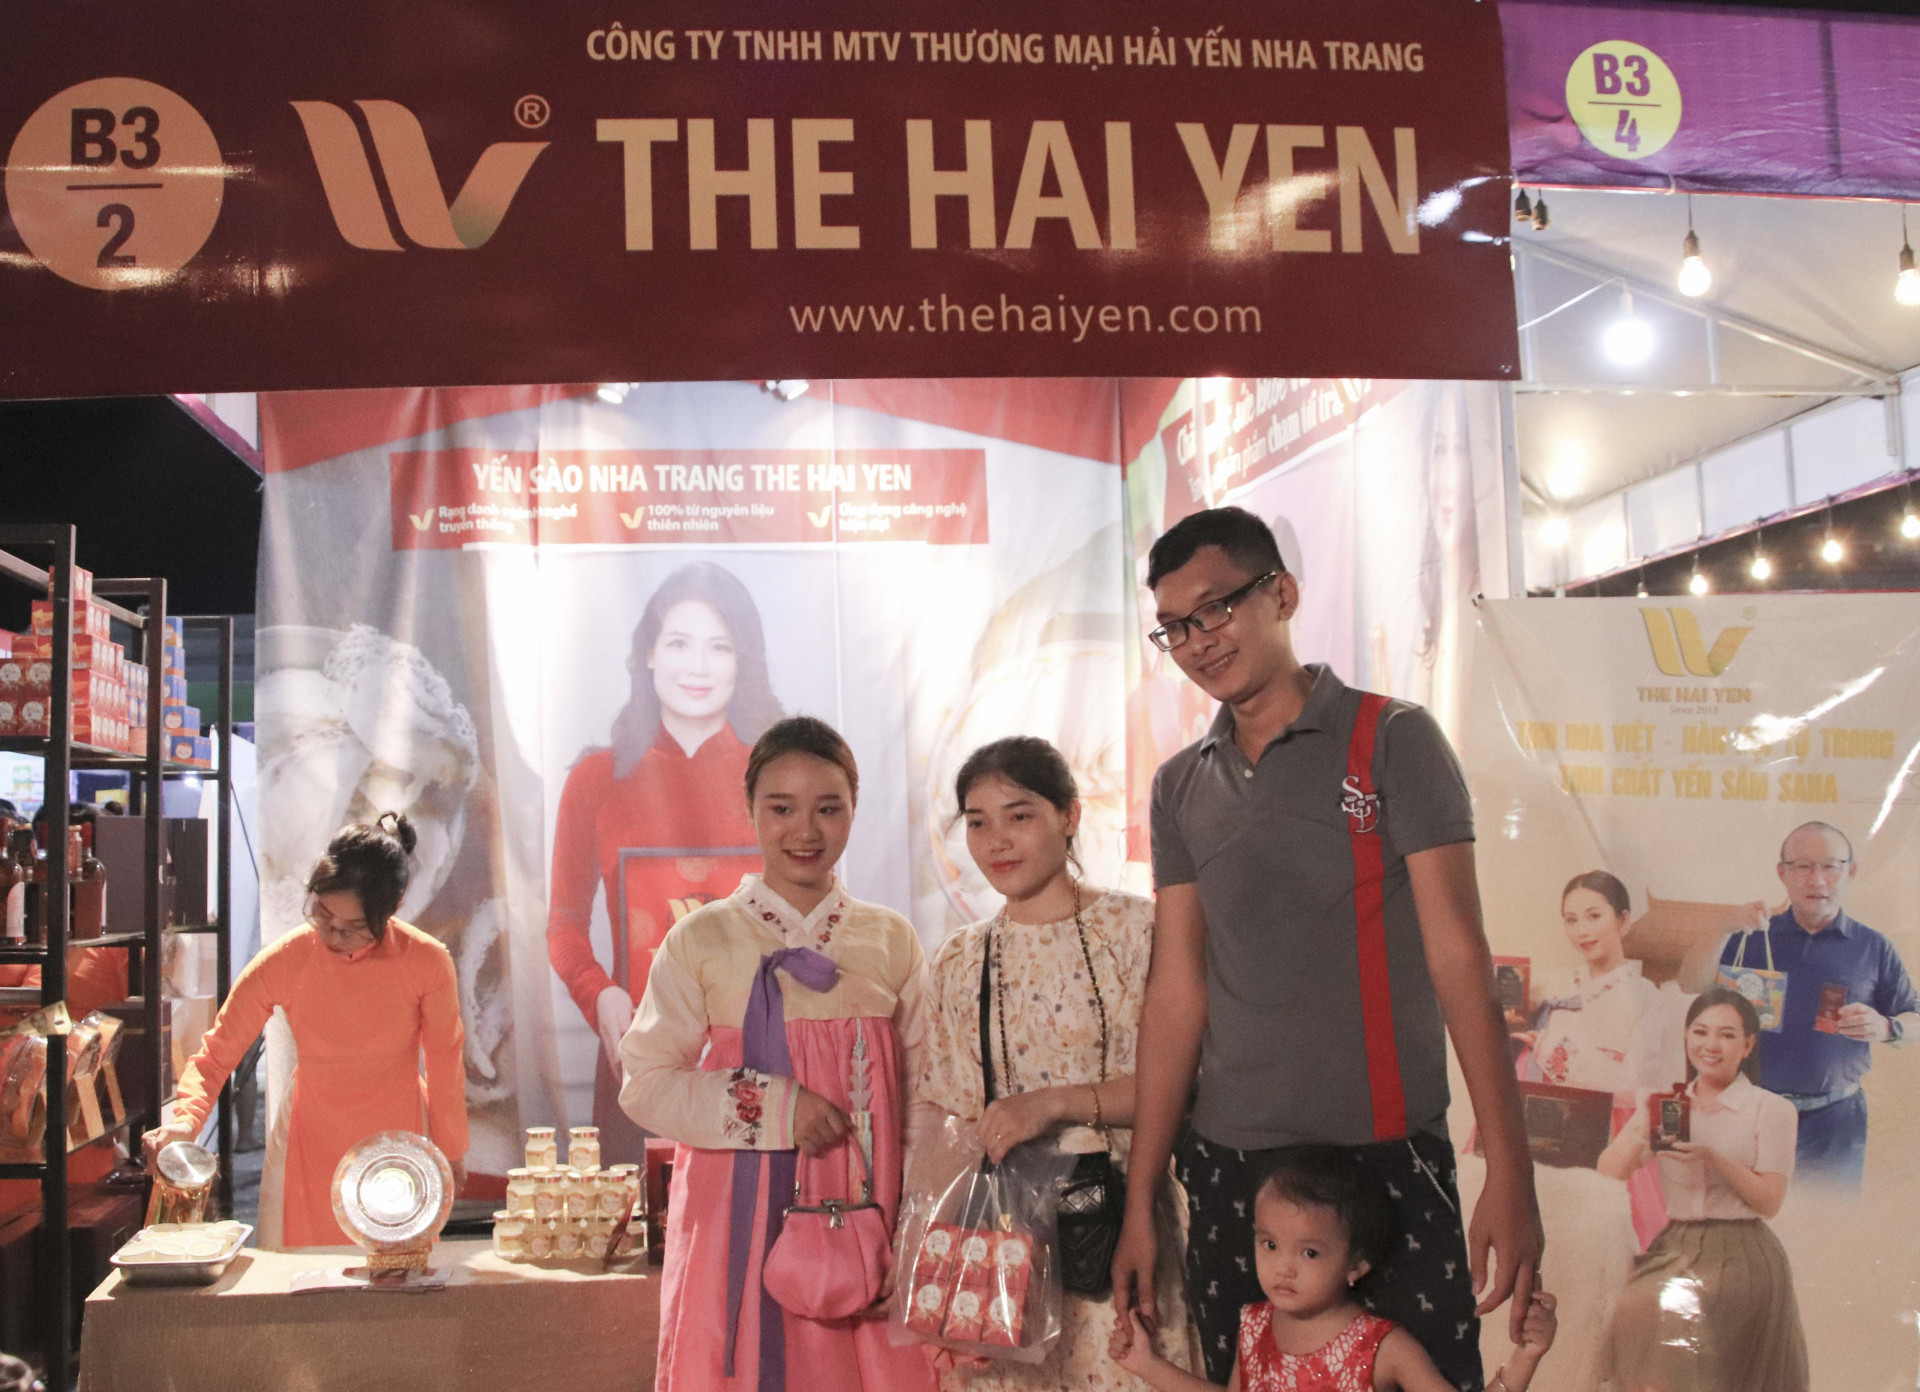 Tourists posing for photo at the stall of Hai Yen Nha Trang Trading Co., Ltd.